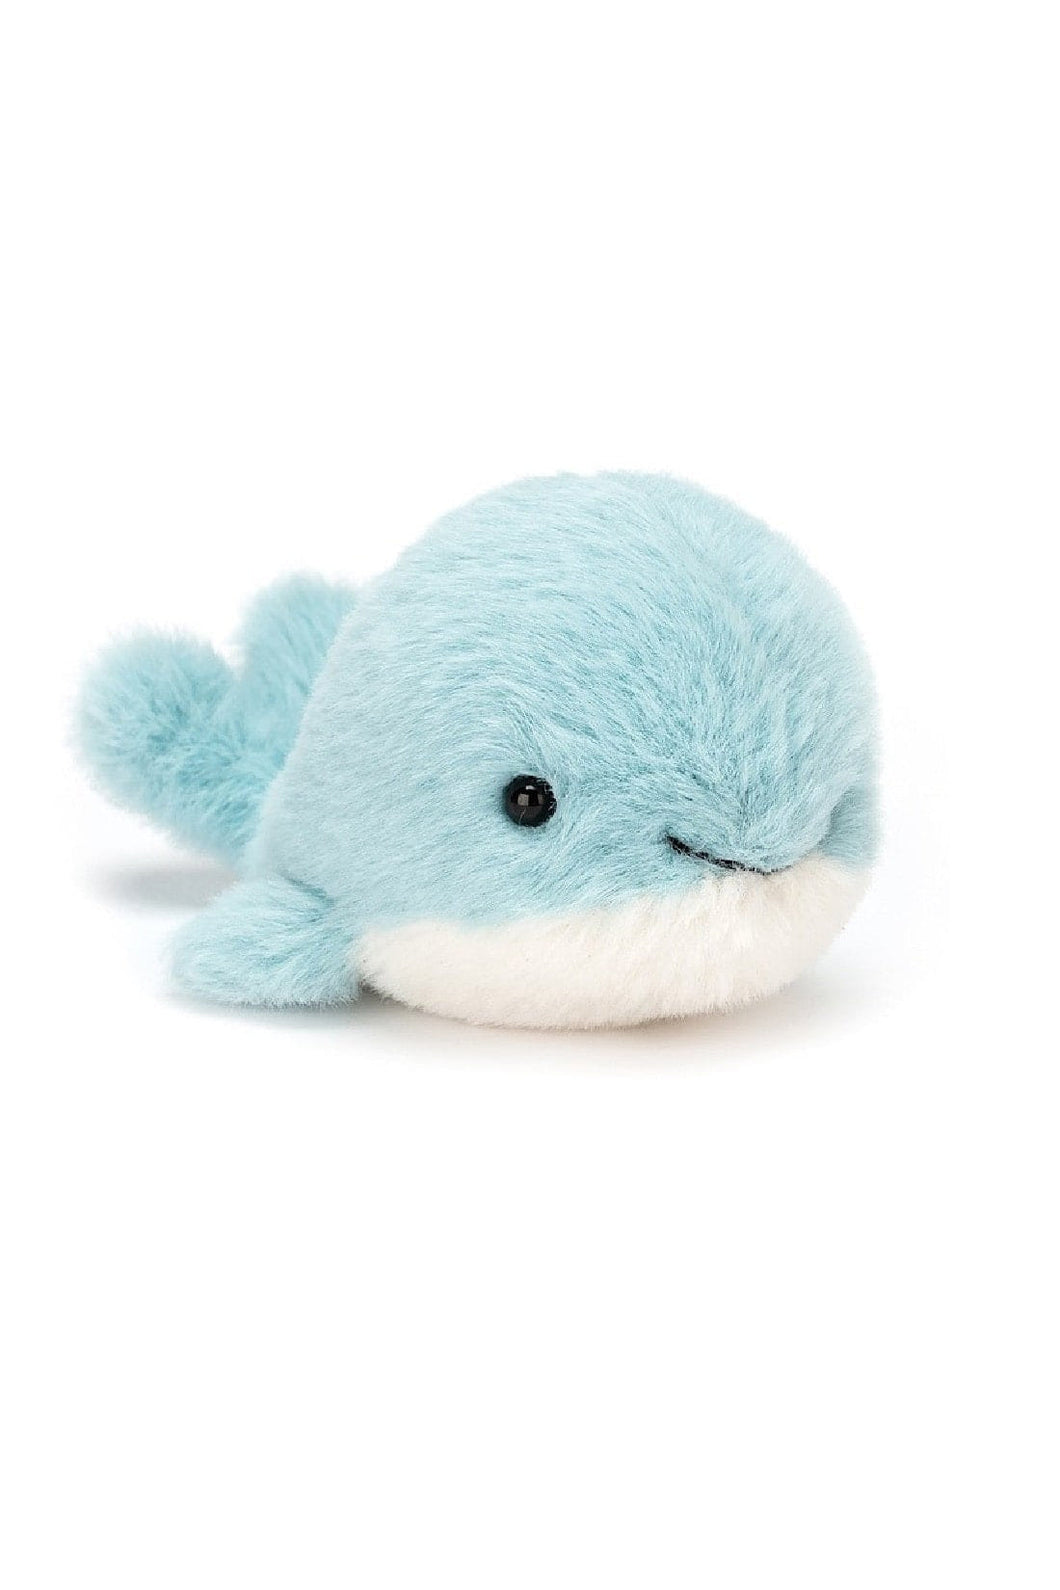 Jellycat Fluffy Whale